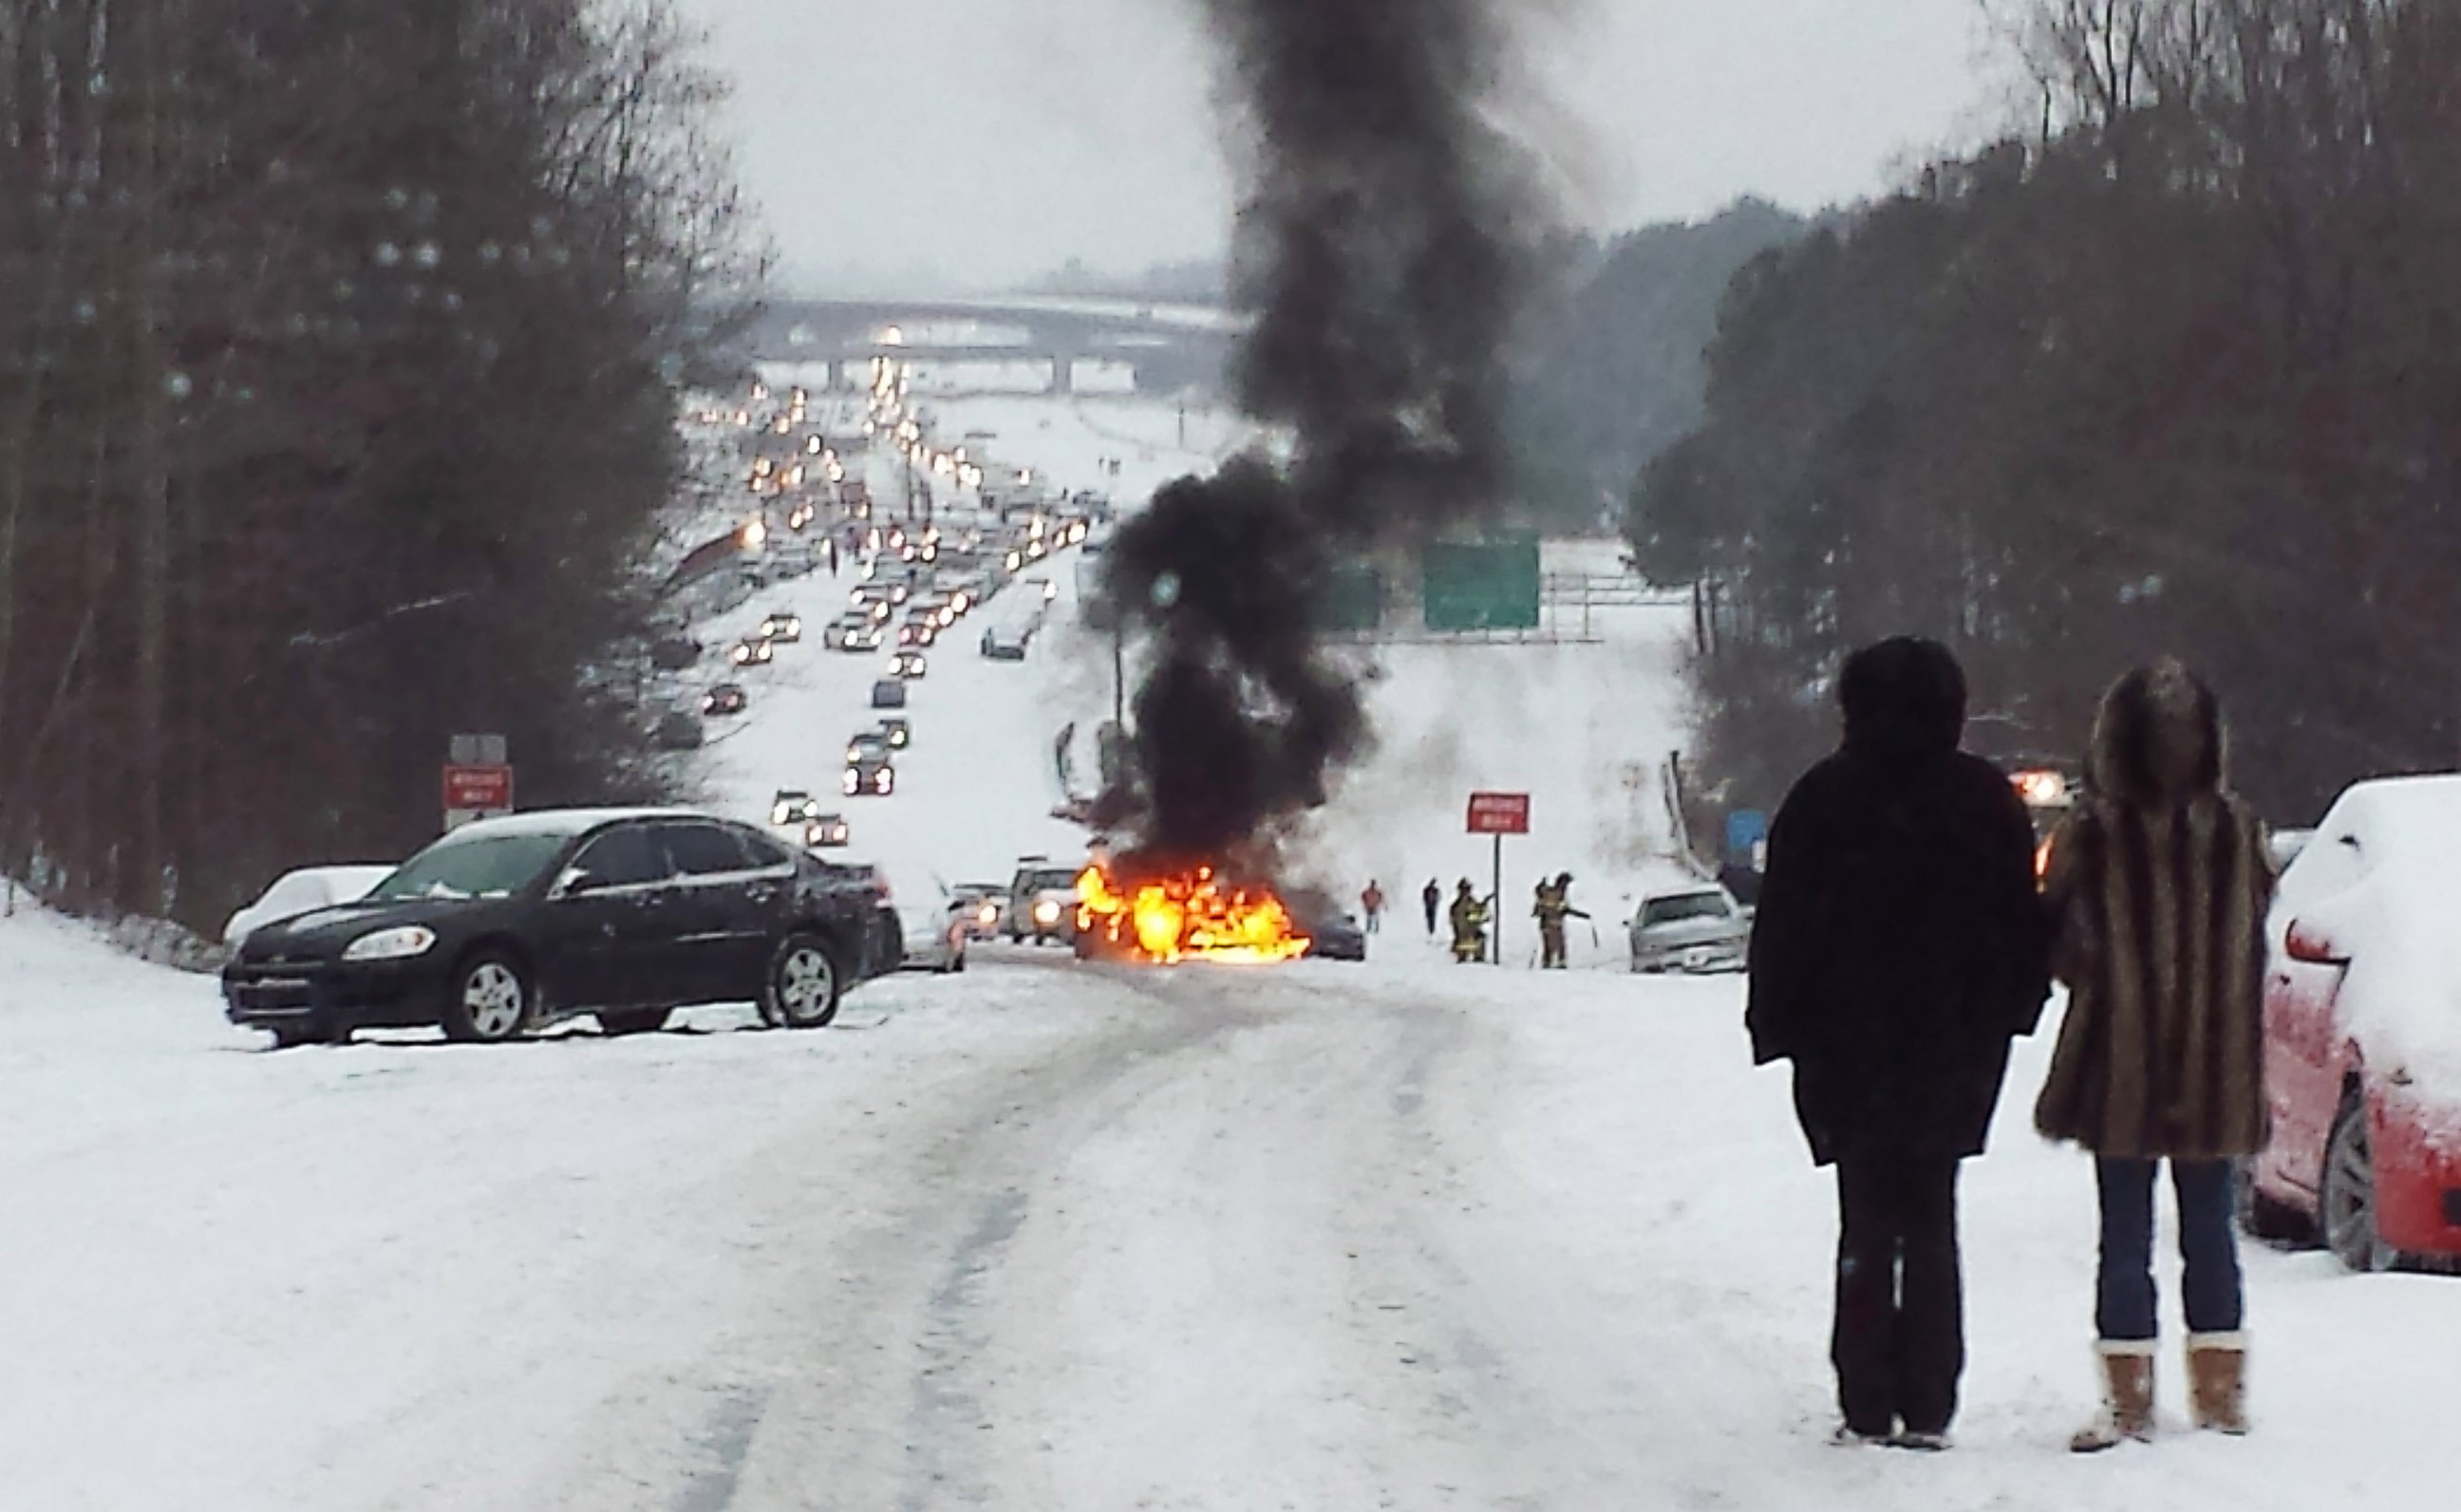 PHOTO: Motorists watch a vehicle burn after it caught fire while struggling to get up a snow covered hill in Raleigh, North Carolina on February 12, 2014.